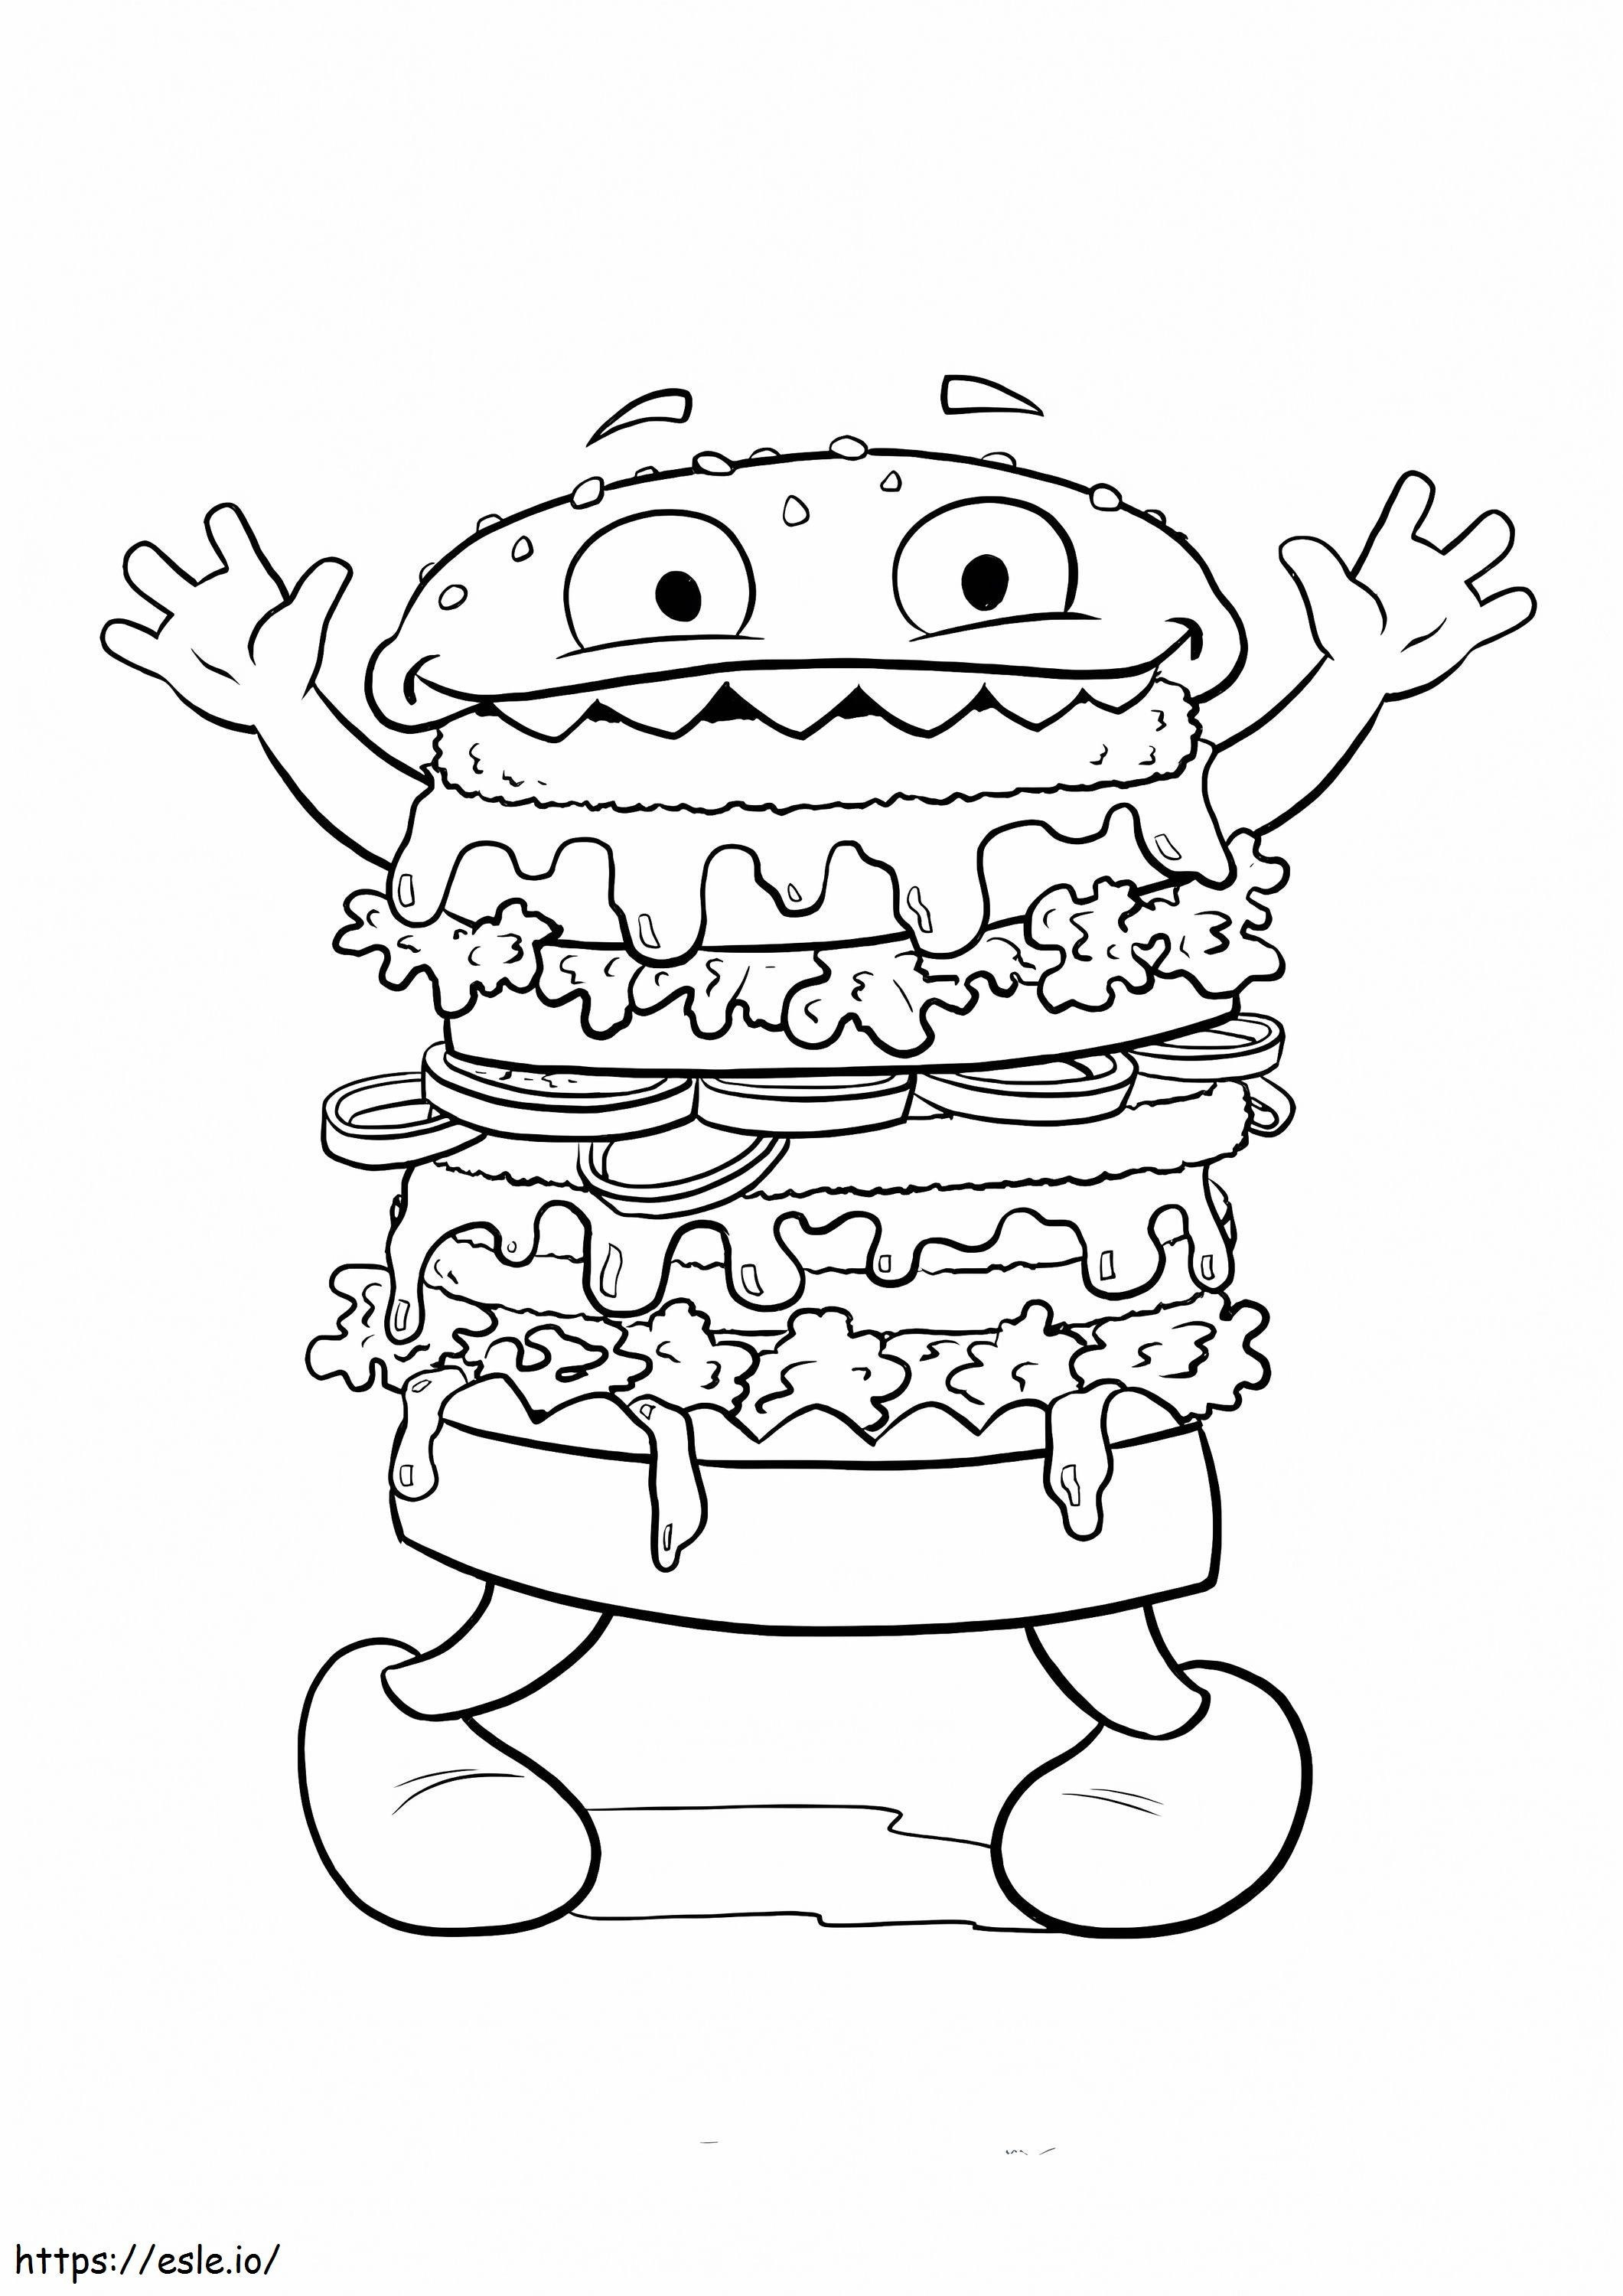 1544522658 Cute Monster Silly Monster Free Printable Silly Monster Magnificent Monsters Sketch Example Resume Color Cute Monster Free coloring page